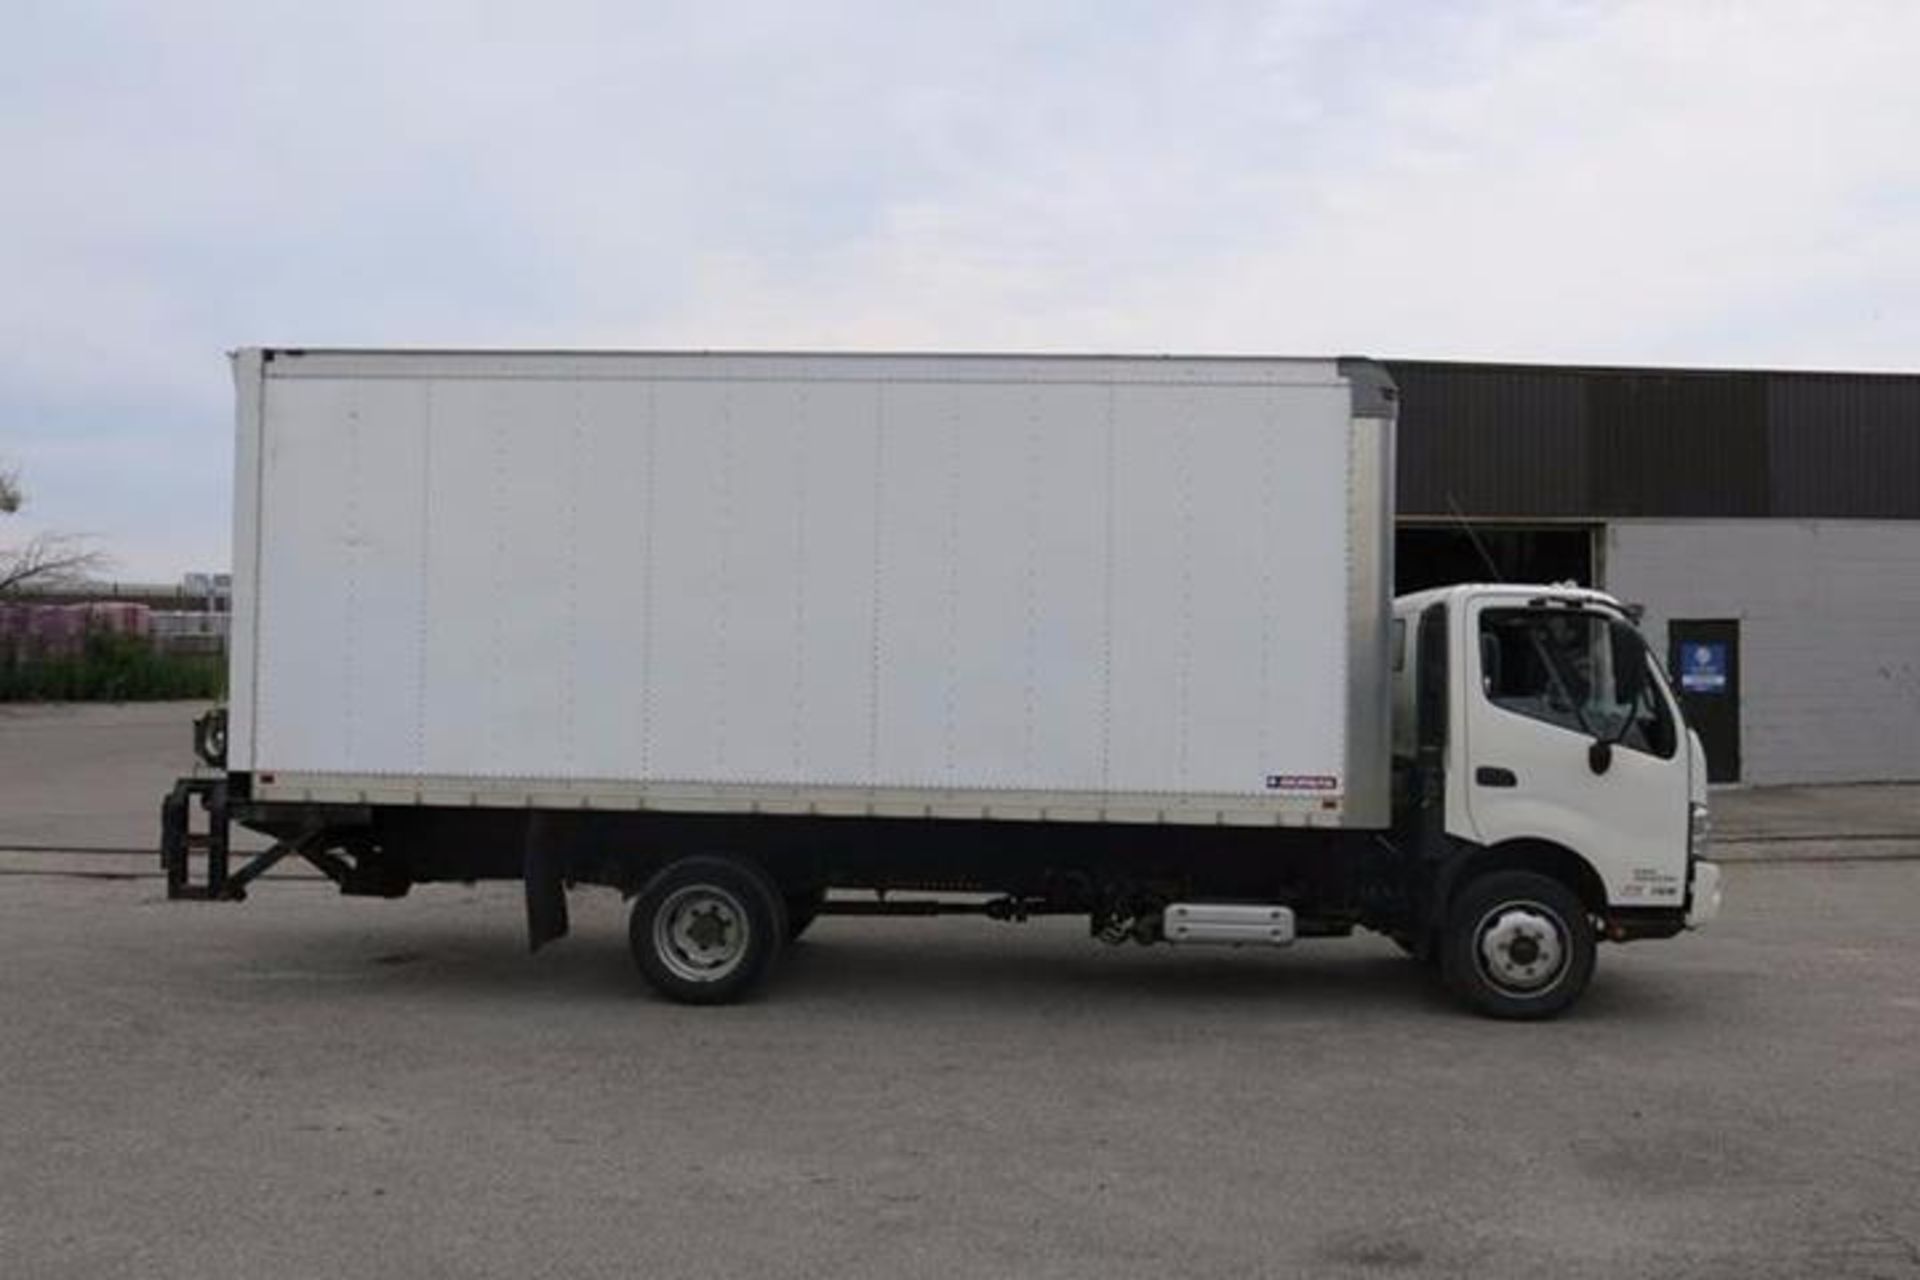 HINO 195, 20’, BOX TRUCK WITH POWER TAILGATE, BOX DIMENSIONS (20’ LONG X 7’8” WIDE, 7’8” HIGH) - Image 4 of 9